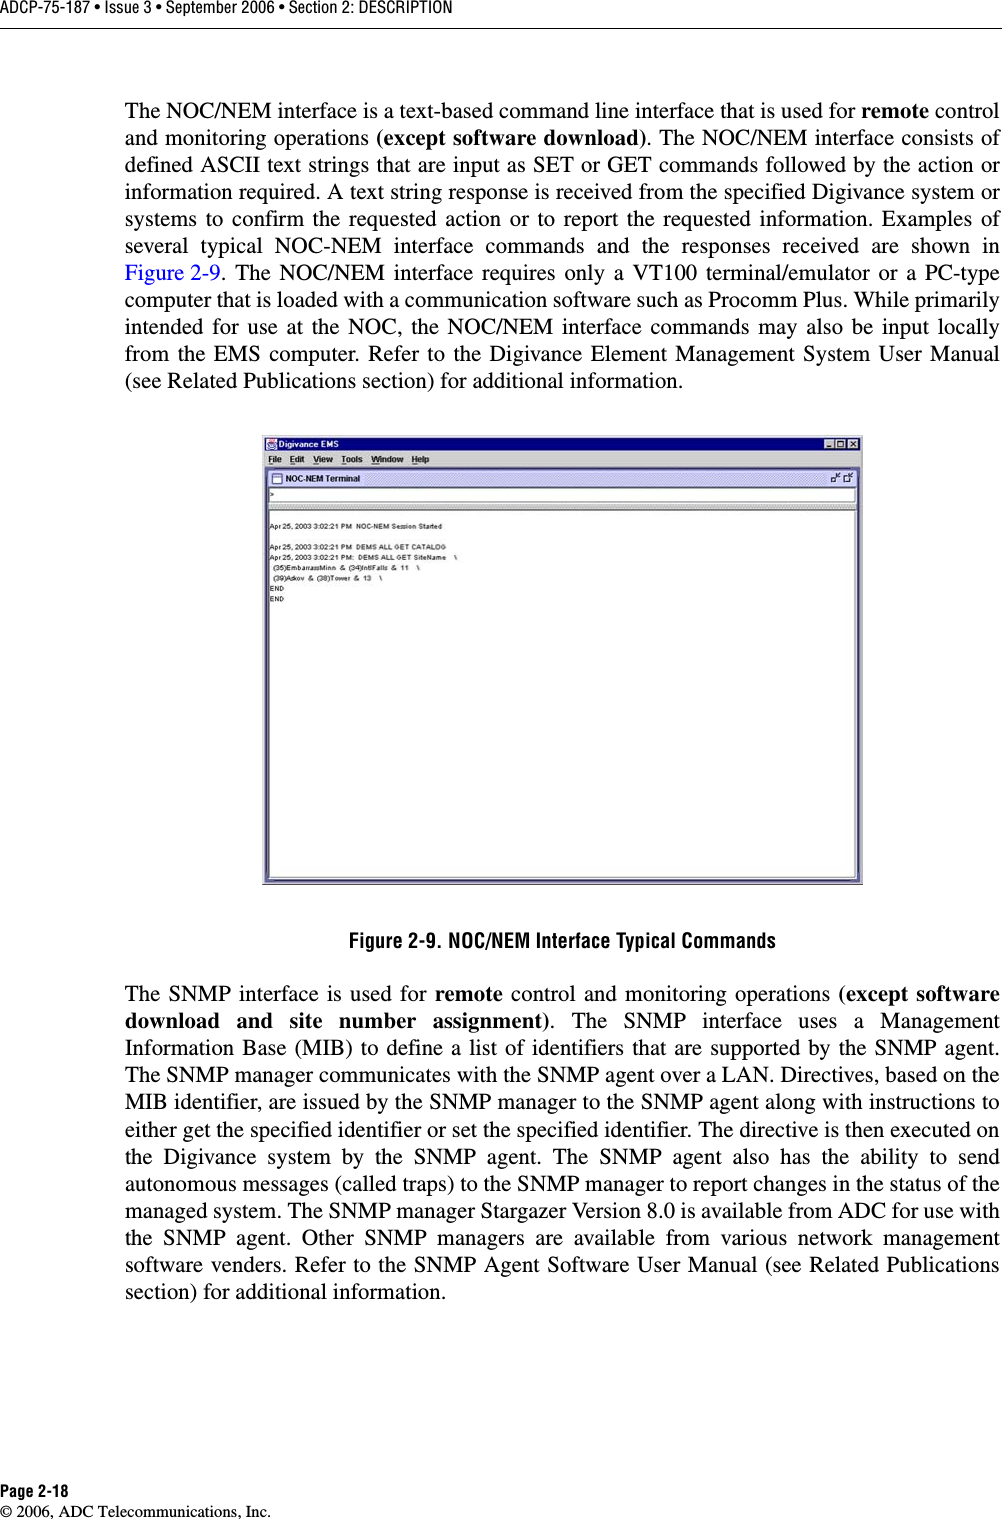 ADCP-75-187 • Issue 3 • September 2006 • Section 2: DESCRIPTIONPage 2-18© 2006, ADC Telecommunications, Inc.The NOC/NEM interface is a text-based command line interface that is used for remote controland monitoring operations (except software download). The NOC/NEM interface consists ofdefined ASCII text strings that are input as SET or GET commands followed by the action orinformation required. A text string response is received from the specified Digivance system orsystems to confirm the requested action or to report the requested information. Examples ofseveral typical NOC-NEM interface commands and the responses received are shown inFigure 2-9. The NOC/NEM interface requires only a VT100 terminal/emulator or a PC-typecomputer that is loaded with a communication software such as Procomm Plus. While primarilyintended for use at the NOC, the NOC/NEM interface commands may also be input locallyfrom the EMS computer. Refer to the Digivance Element Management System User Manual(see Related Publications section) for additional information. Figure 2-9. NOC/NEM Interface Typical CommandsThe SNMP interface is used for remote control and monitoring operations (except softwaredownload and site number assignment). The SNMP interface uses a ManagementInformation Base (MIB) to define a list of identifiers that are supported by the SNMP agent.The SNMP manager communicates with the SNMP agent over a LAN. Directives, based on theMIB identifier, are issued by the SNMP manager to the SNMP agent along with instructions toeither get the specified identifier or set the specified identifier. The directive is then executed onthe Digivance system by the SNMP agent. The SNMP agent also has the ability to sendautonomous messages (called traps) to the SNMP manager to report changes in the status of themanaged system. The SNMP manager Stargazer Version 8.0 is available from ADC for use withthe SNMP agent. Other SNMP managers are available from various network managementsoftware venders. Refer to the SNMP Agent Software User Manual (see Related Publicationssection) for additional information. 